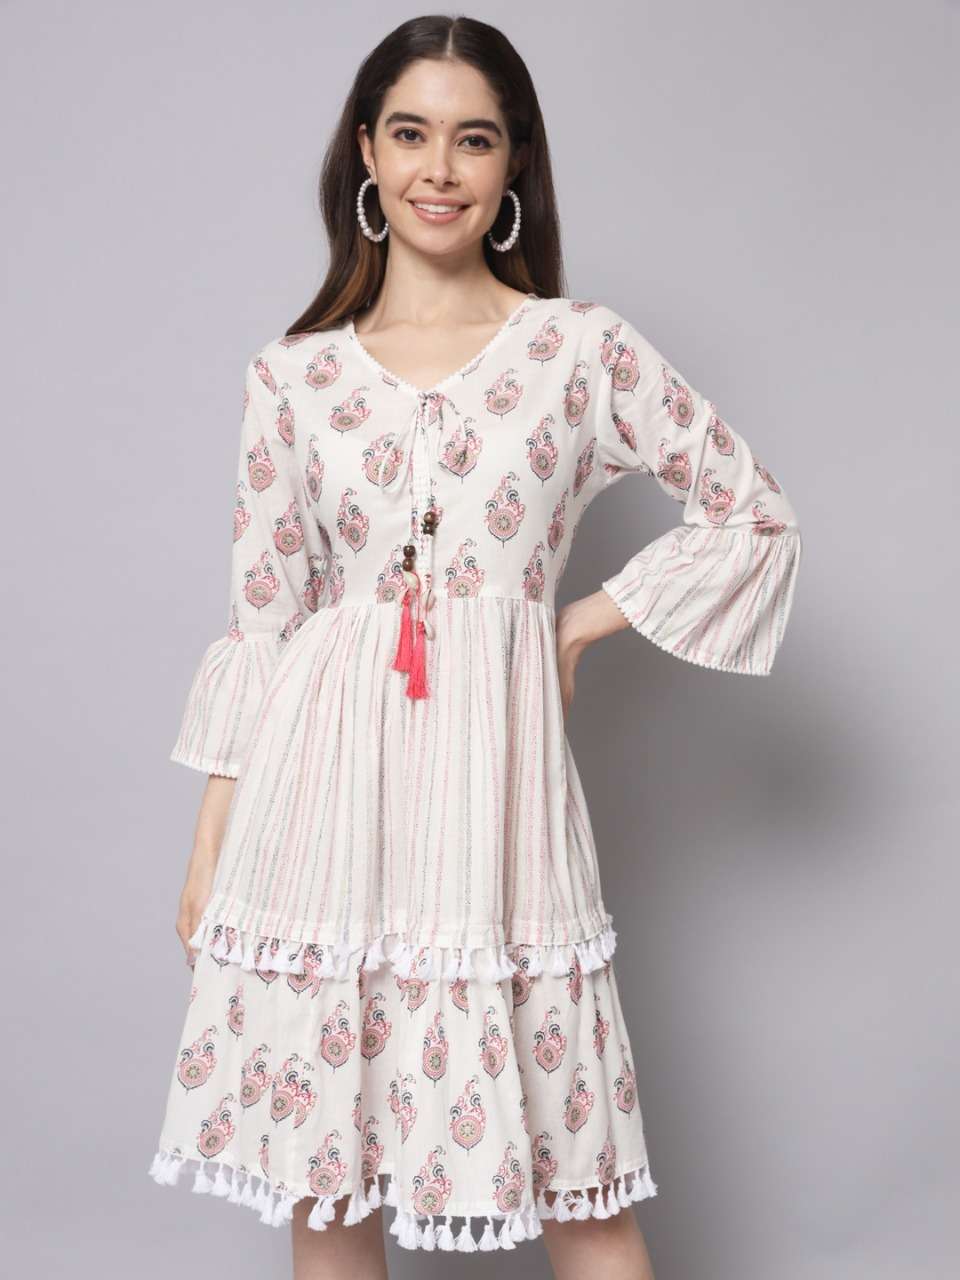 VREDE VOGEL COTTON INNOVATIVE LOOK TUNIC TOP CATALOG